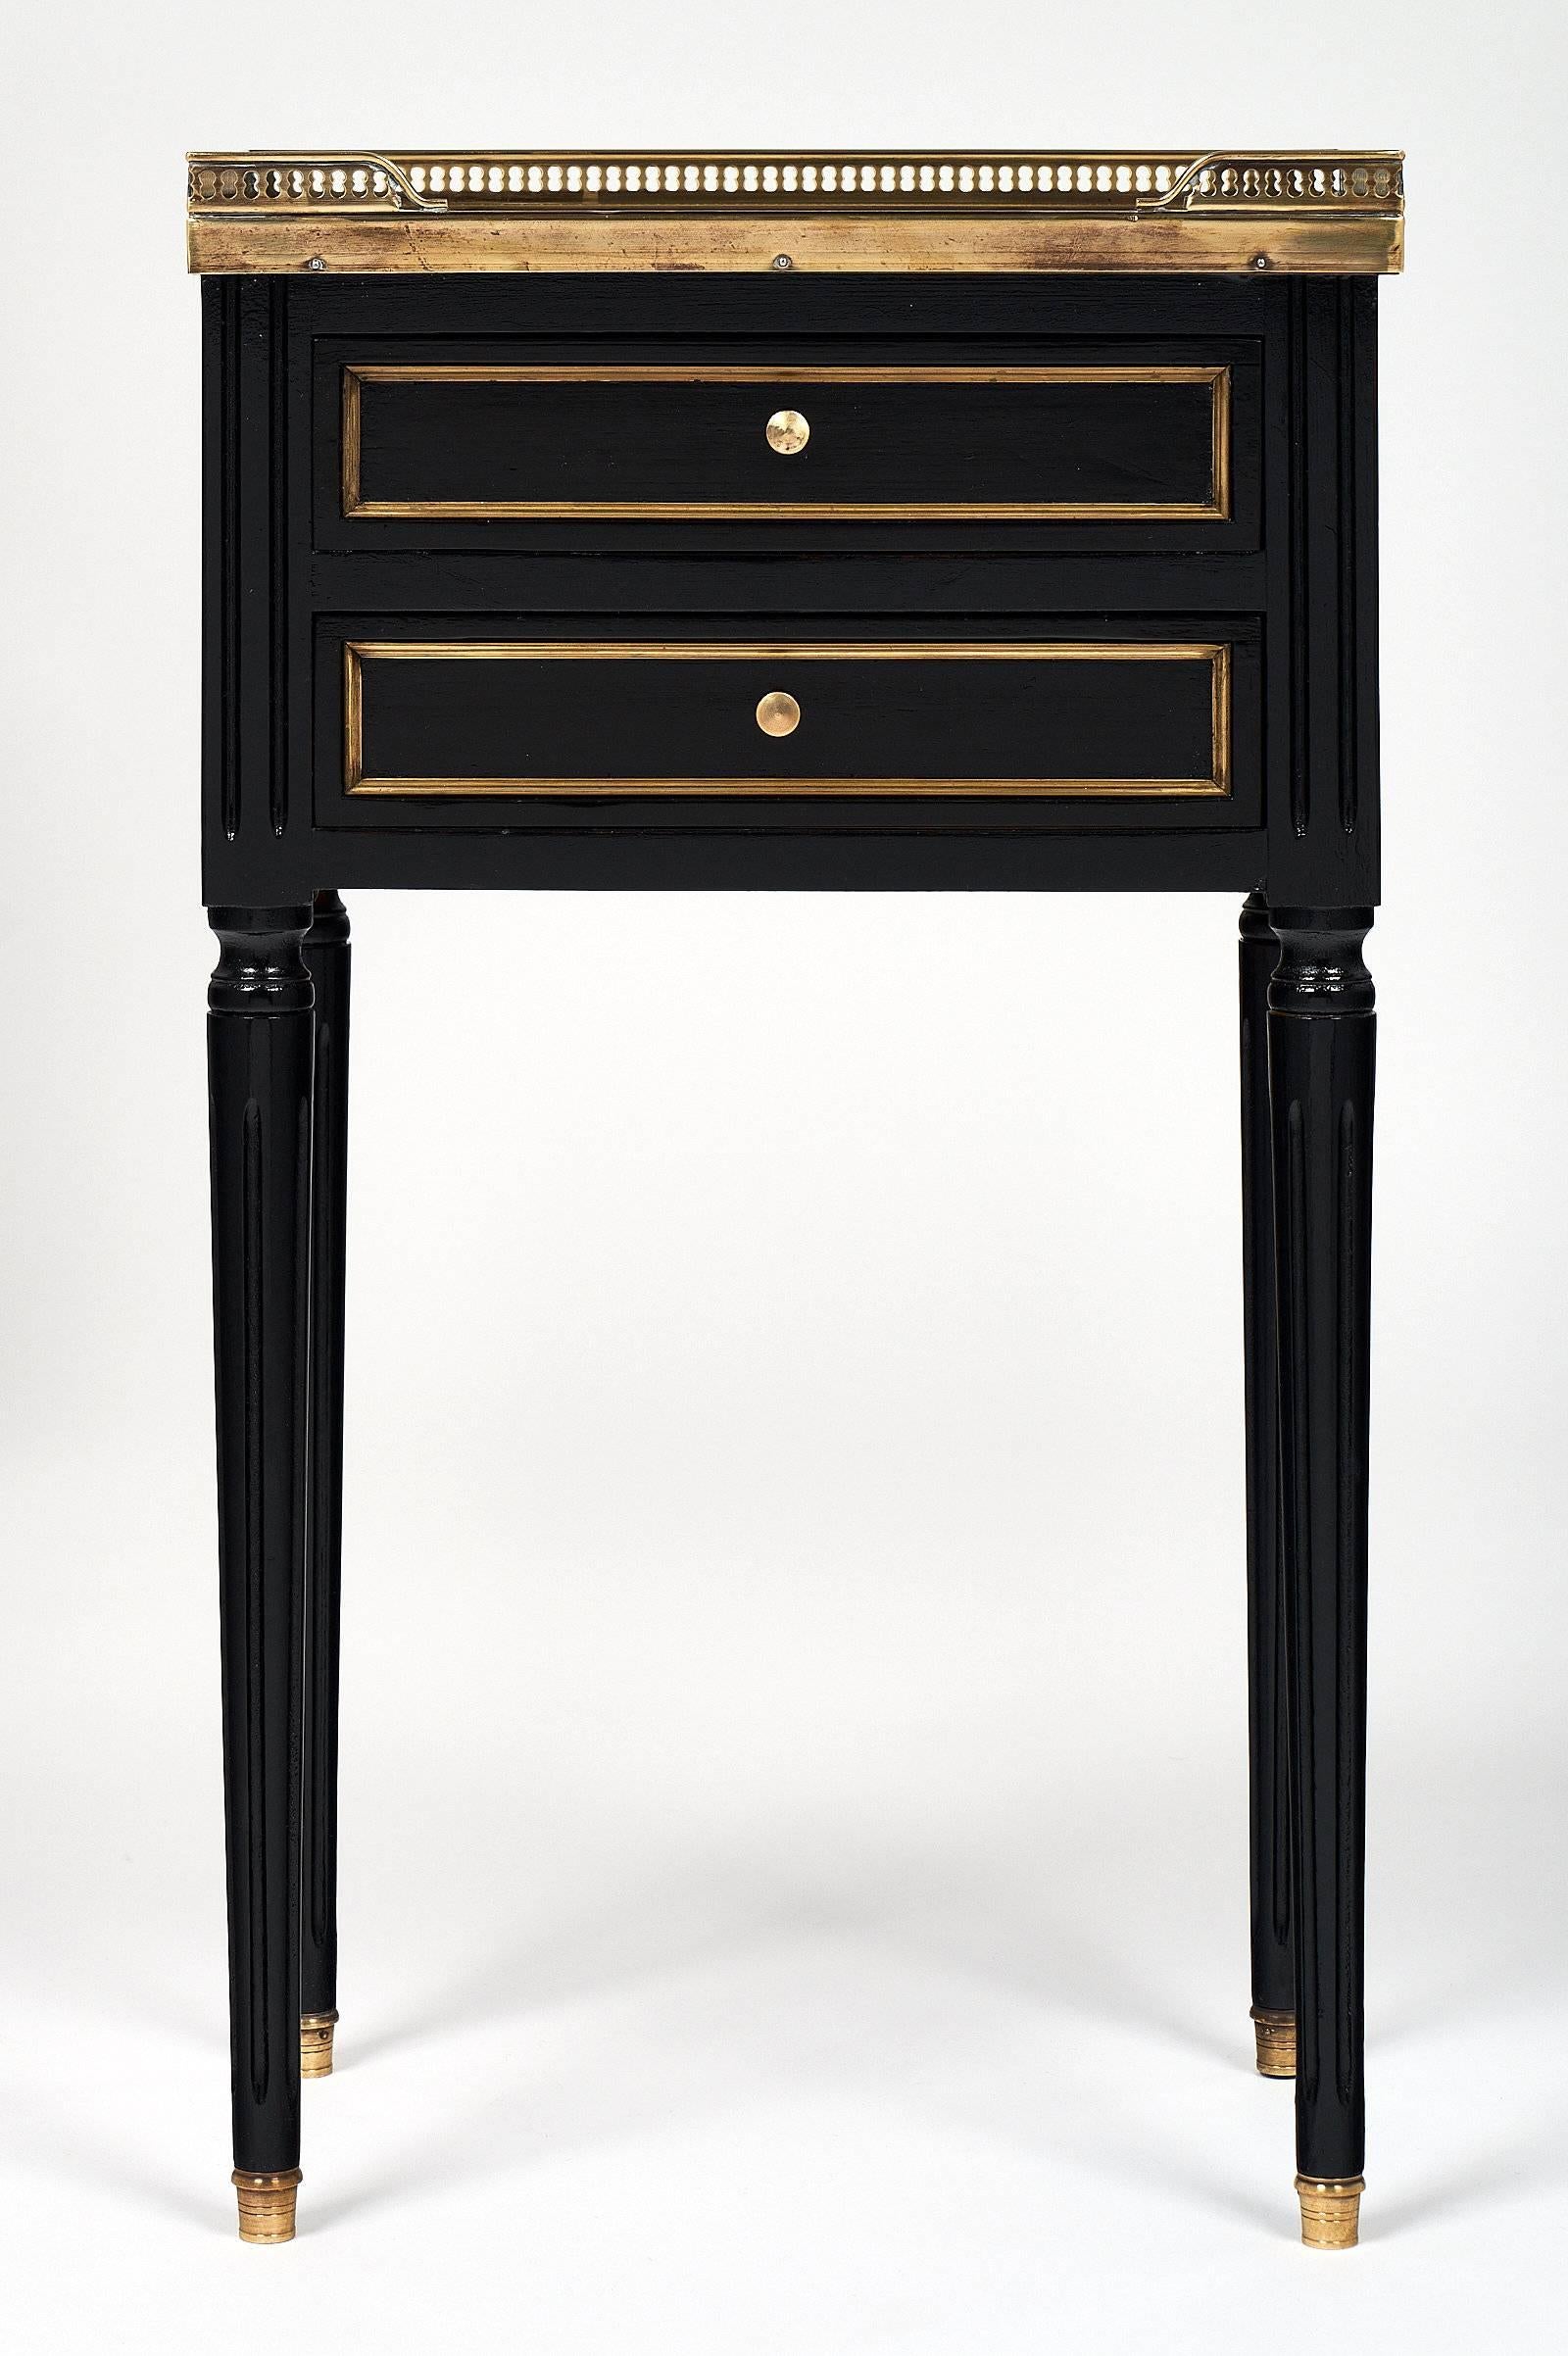 A pair of Louis XVI side tables made of ebonized mahogany that has been finished with a lustrous French polish. Each table is topped with Carrara marble, and features a gilt brass gallery, two dovetailed drawers; and fluted legs with brass feet. An